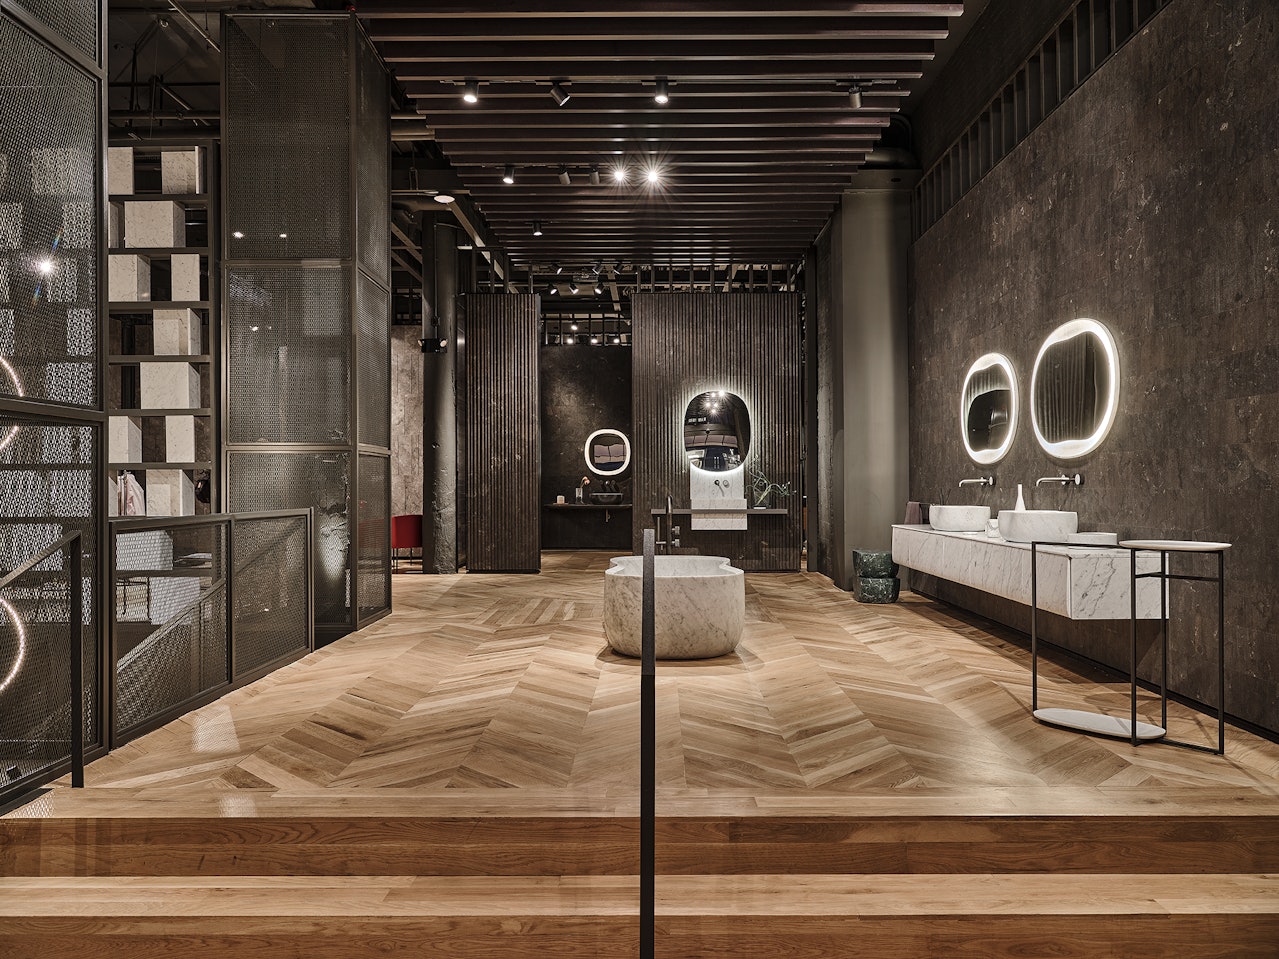 Gucci Opens New York Wooster Street Store